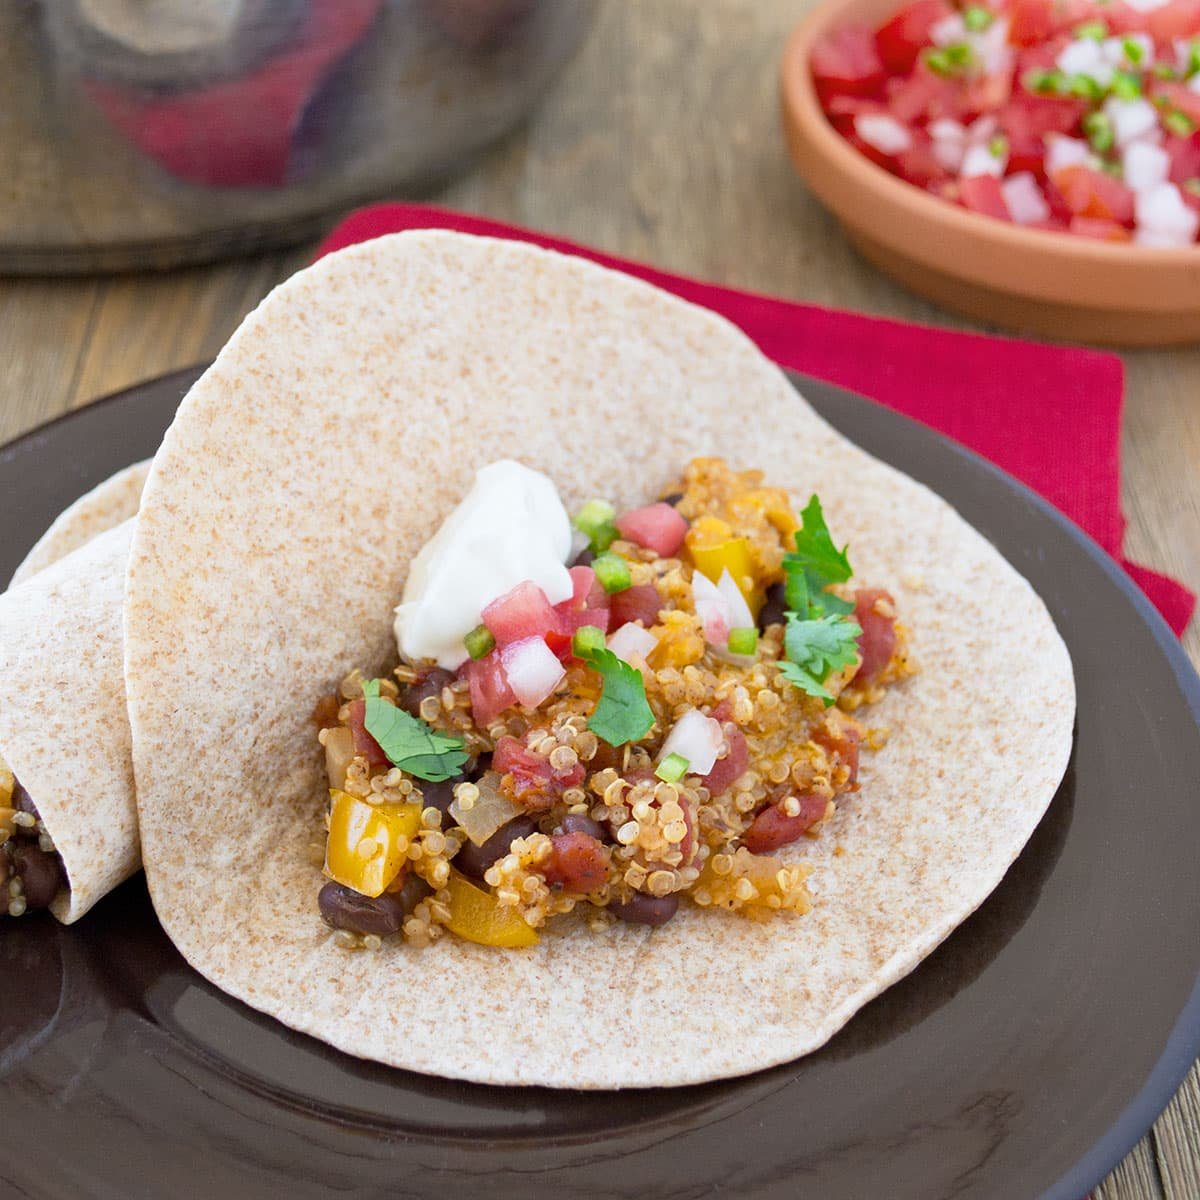 A flour tortilla on a brown plate filled with a mixture of quinoa, bell peppers, cheddar cheese melted, and cilantro, all topped with sour cream. Pico de gallo and a skillet with more quinoa mixture are in the background.